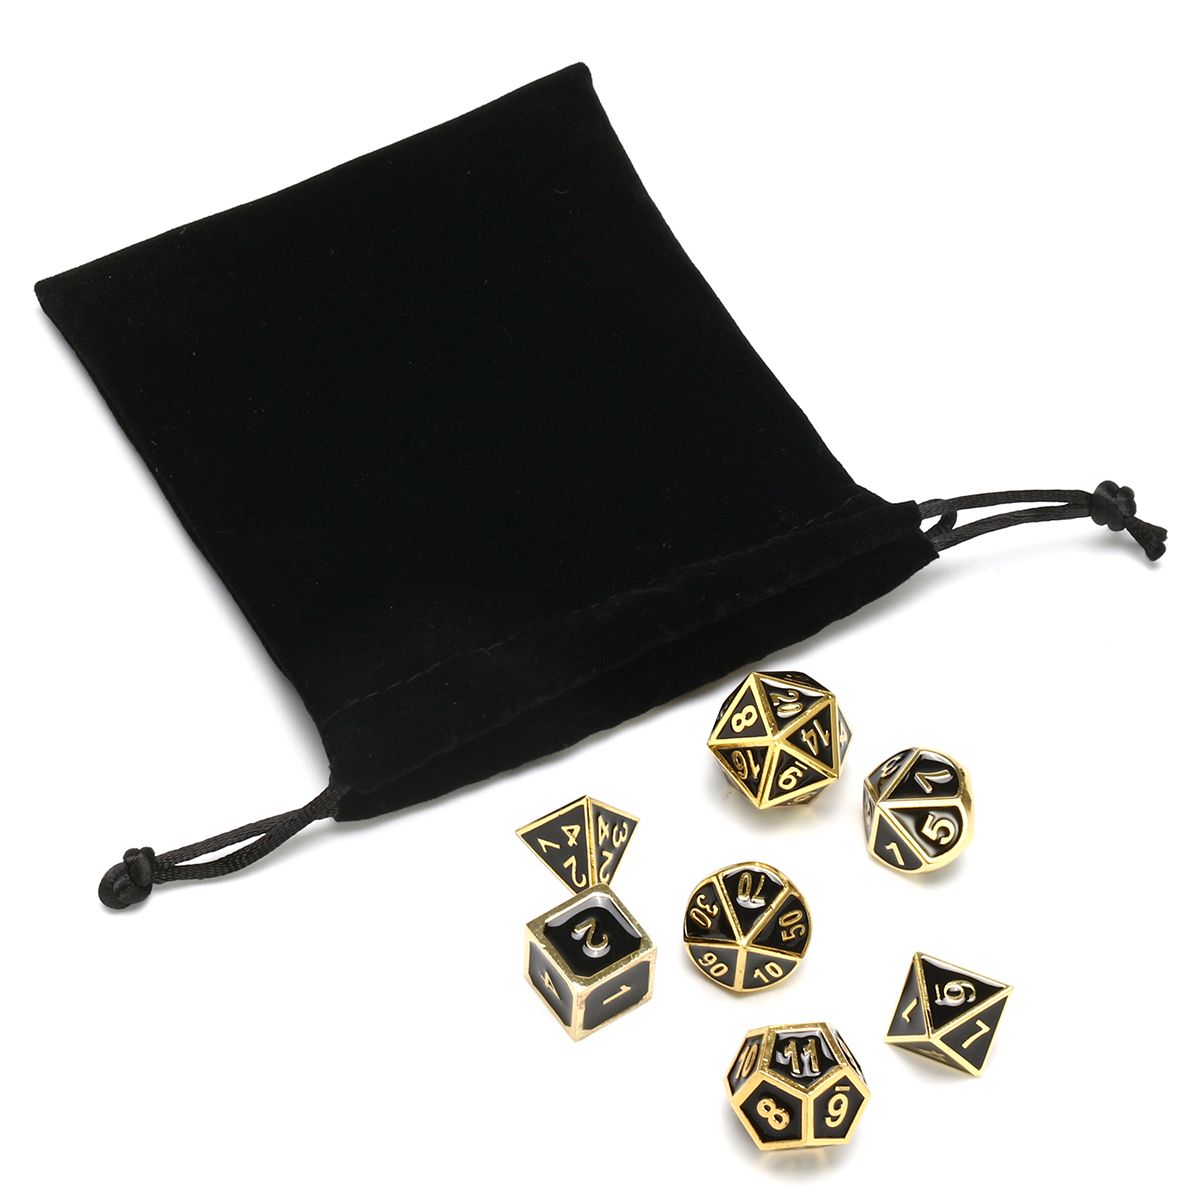 7Pcs-Dice-Polyhedral-Dices-Set-Zinc-Alloy-Metal-Polyhedral-Role-Multi-sided-D4-D20-with-Bags-1364749